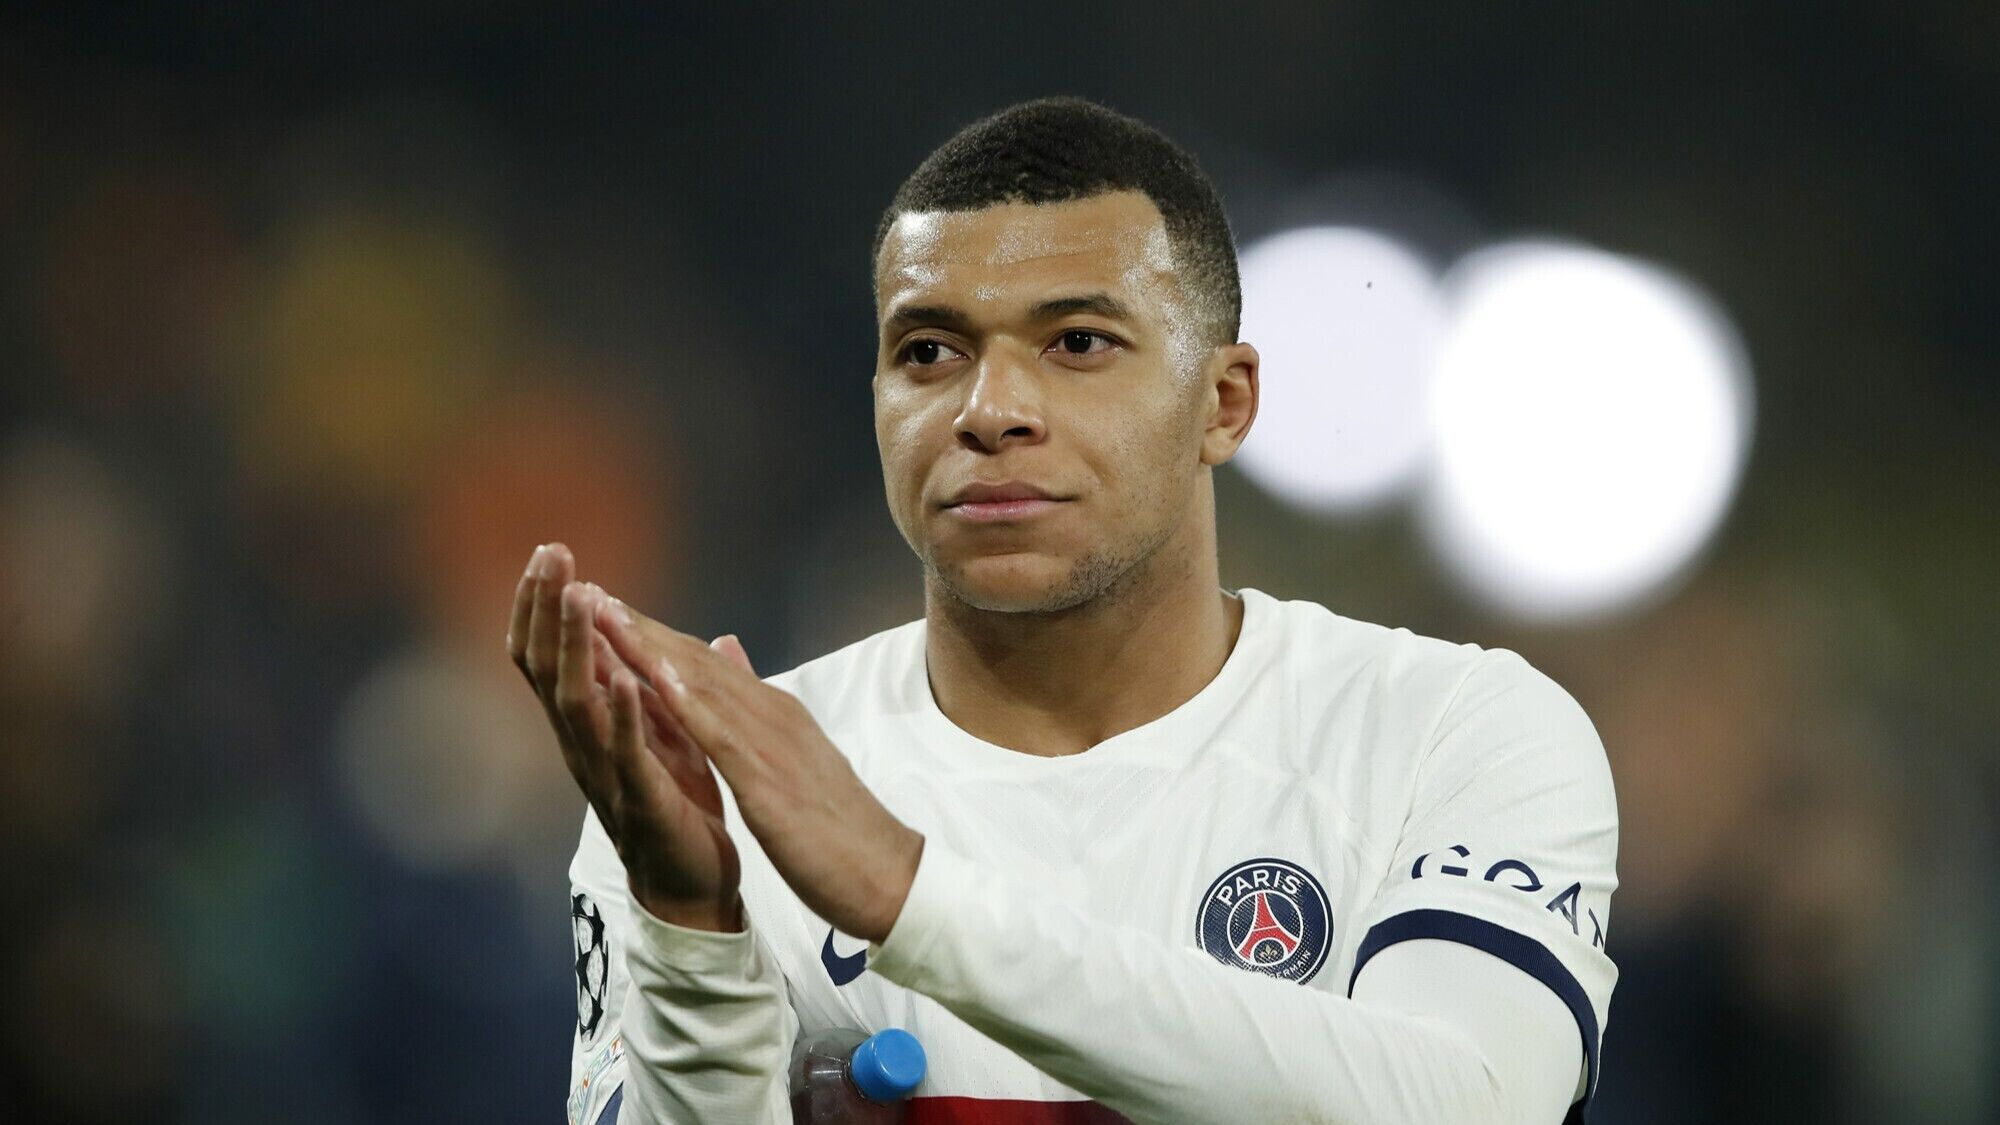 Mbappe Announces He Will Leave PSG At The End Of The Season